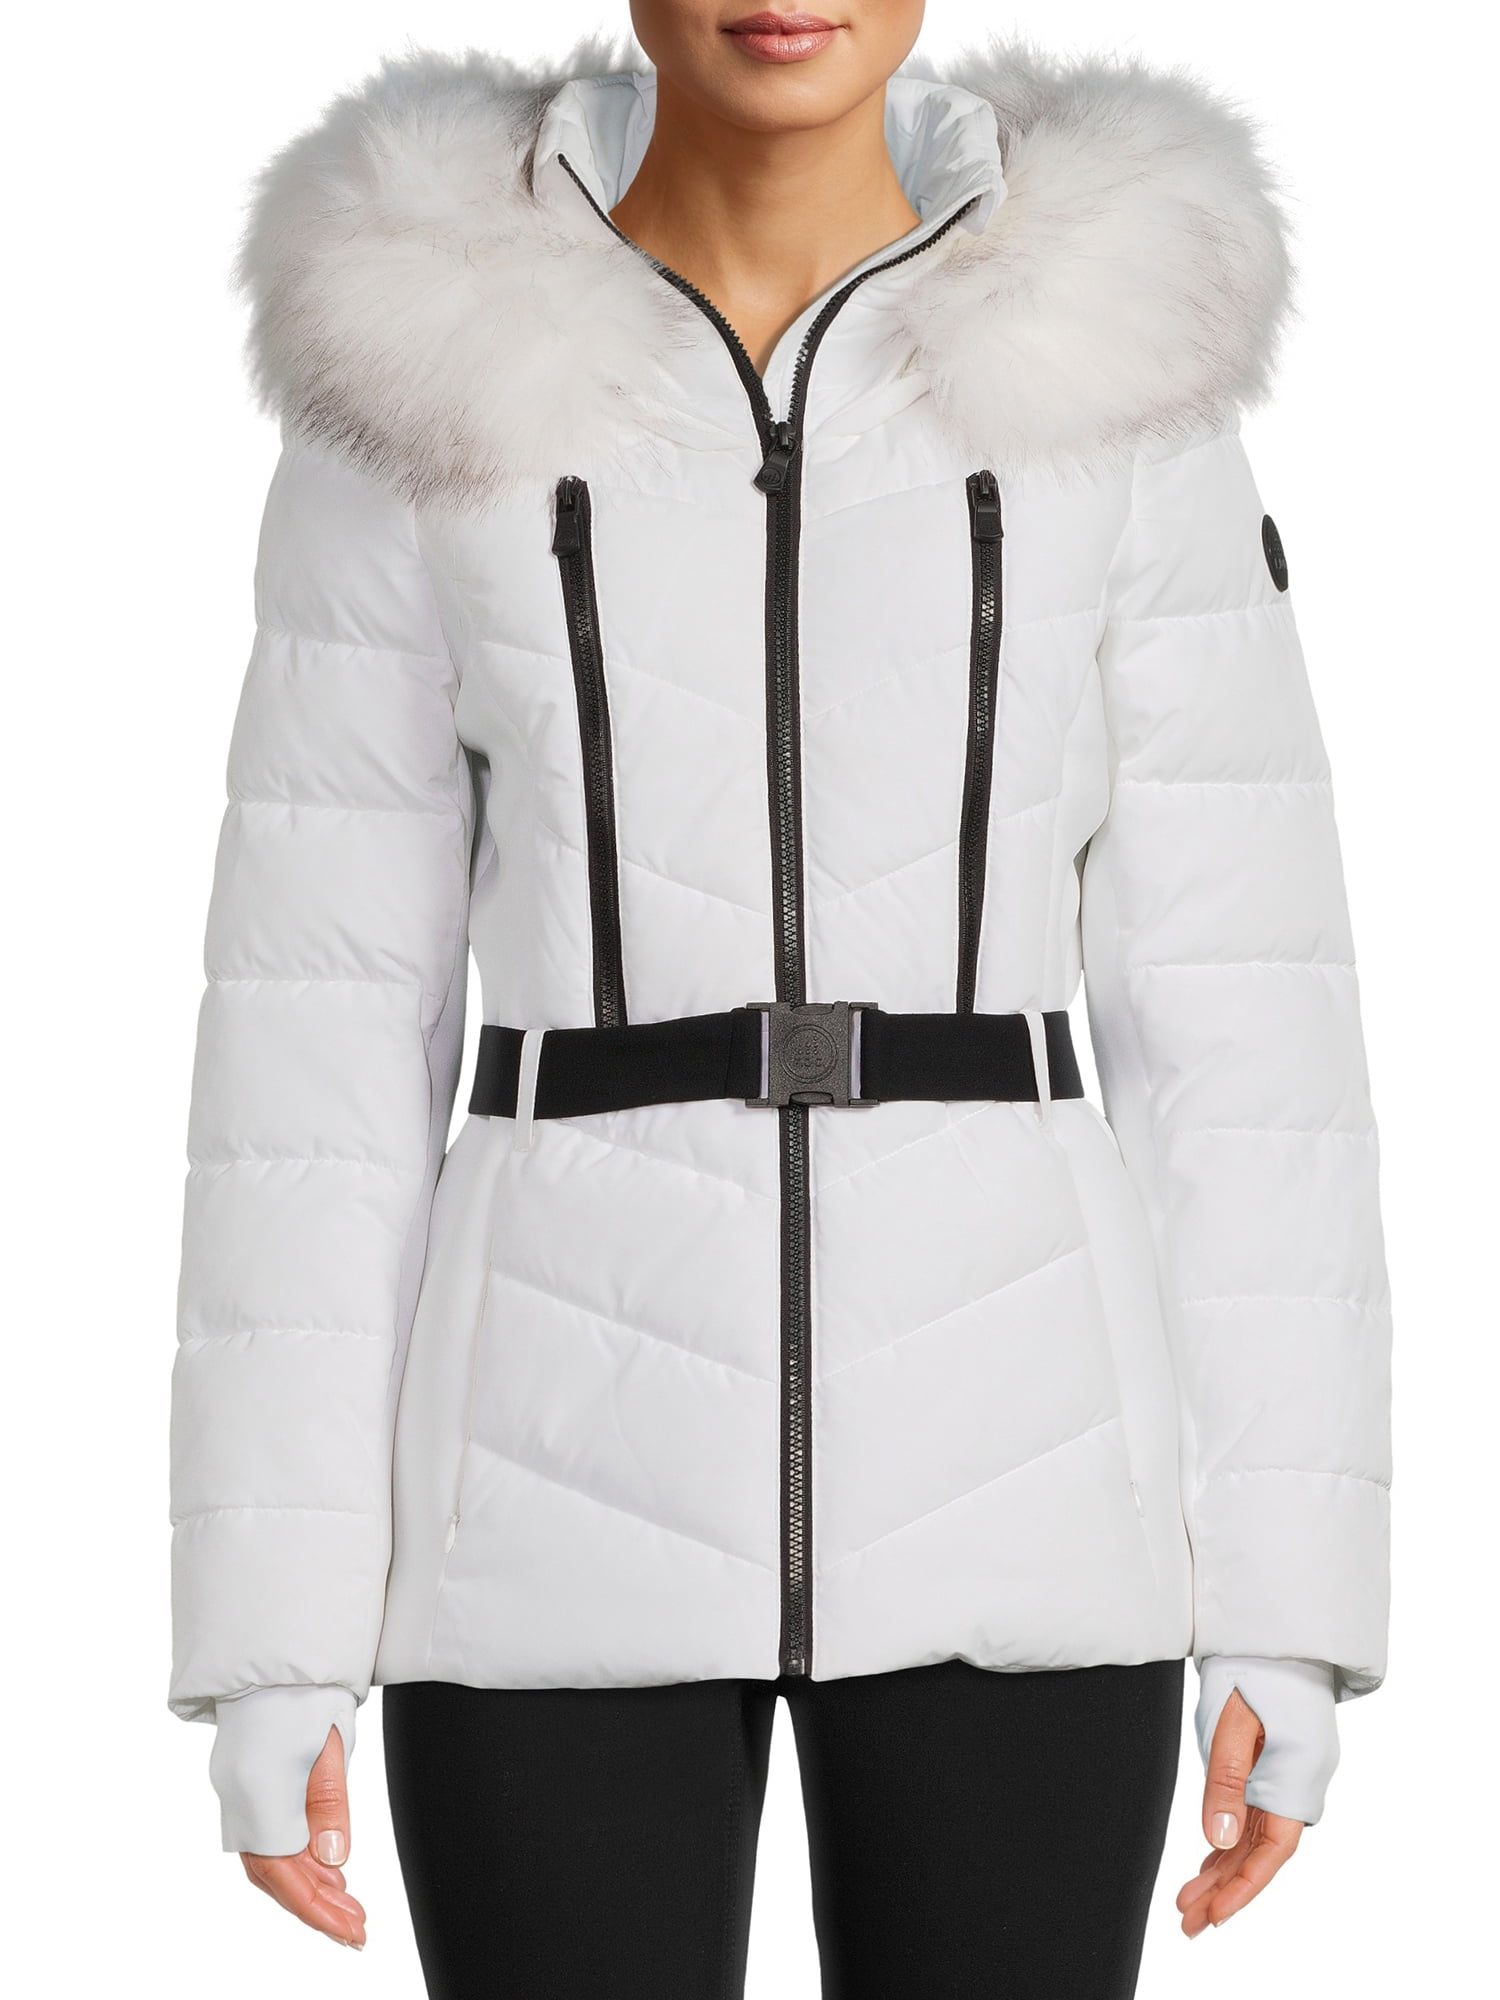 F.O.G. Women's Belted Puffer Coat with Faux Fur Hood, Sizes XS-3X ...